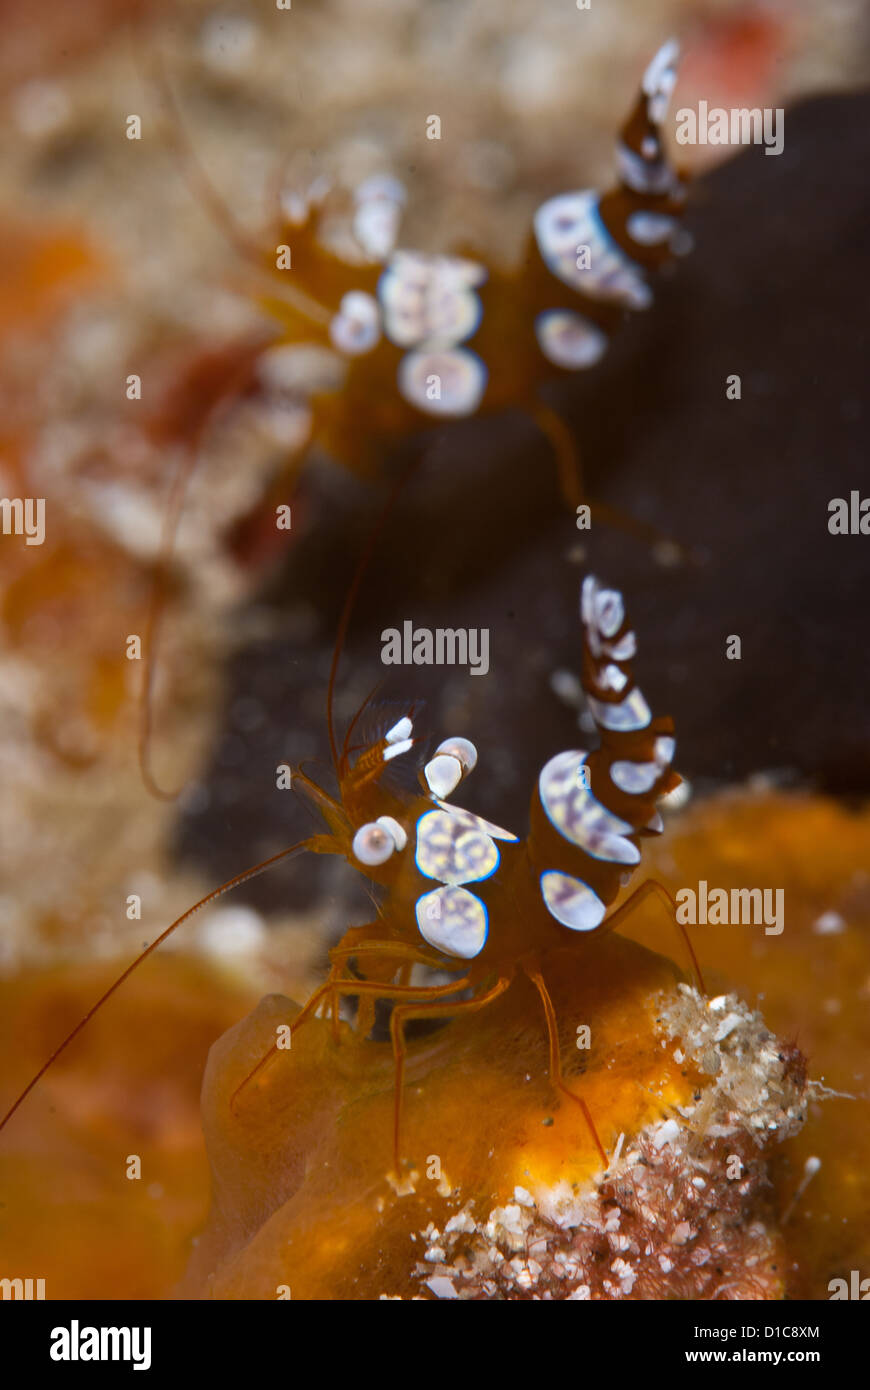 A pair or couple of anemone shrimps taken up very close during a dive in Komodo. Macro shot critters Stock Photo